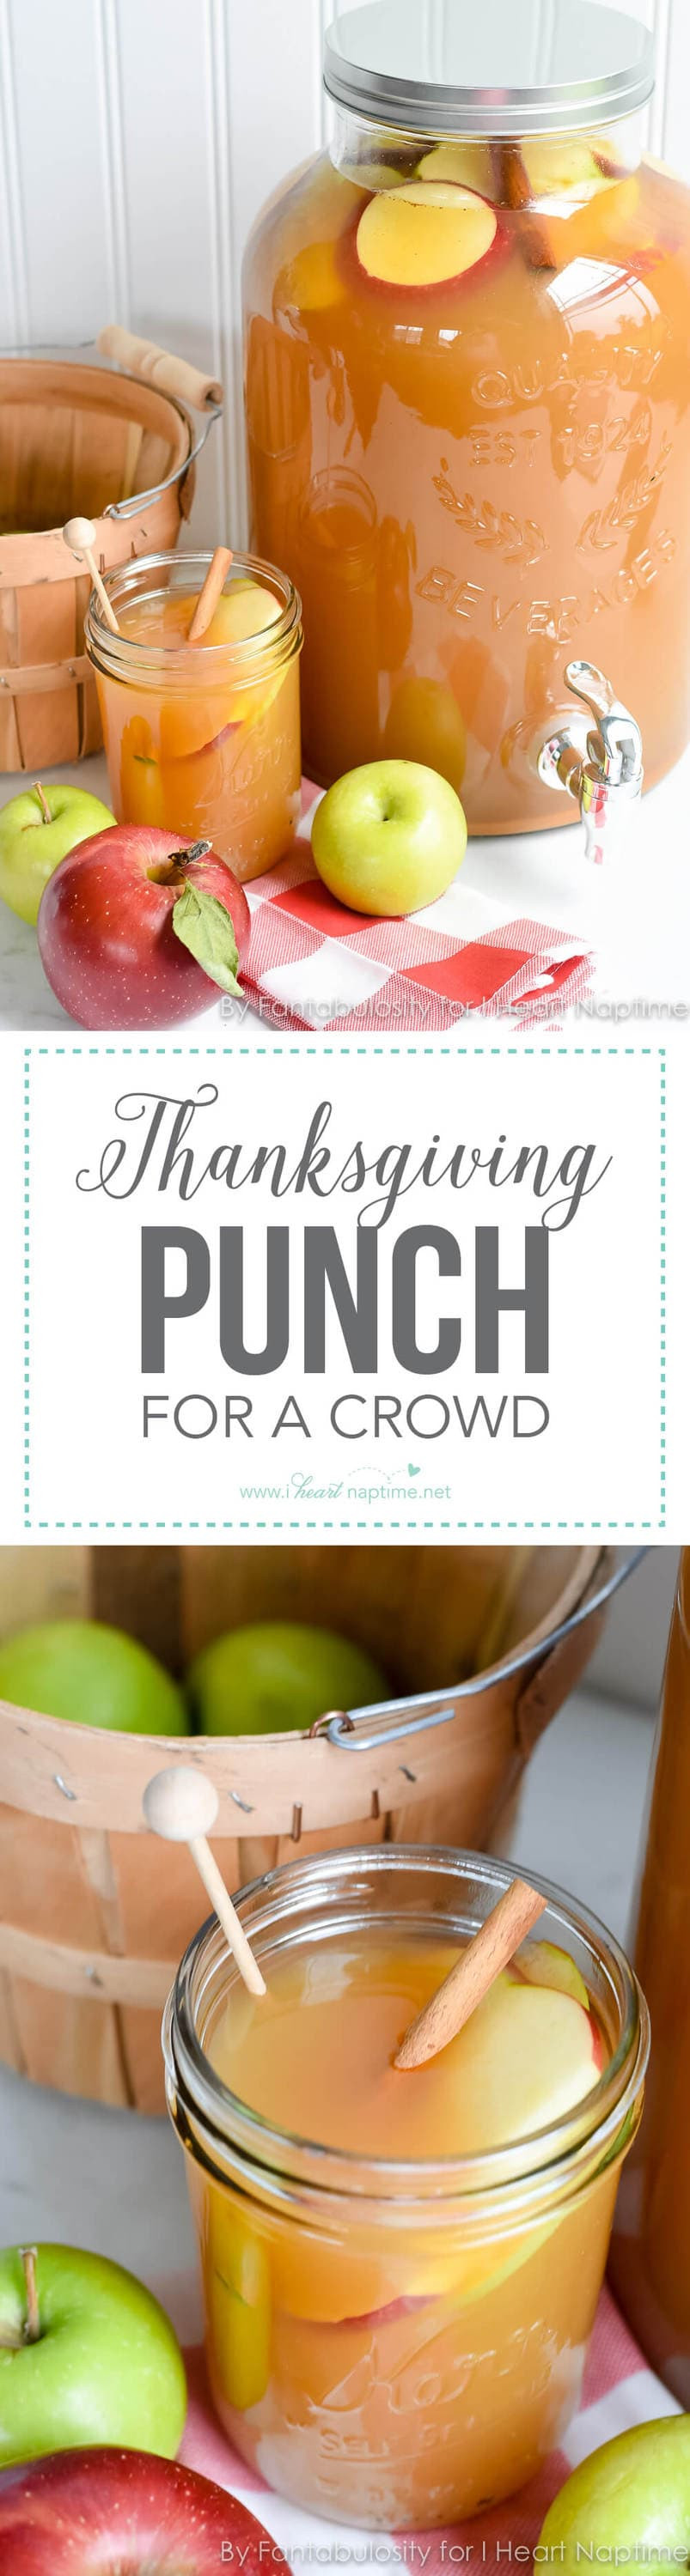 Fall Dinners For A Crowd
 Thanksgiving Punch for a Crowd 3 ingre nts I Heart